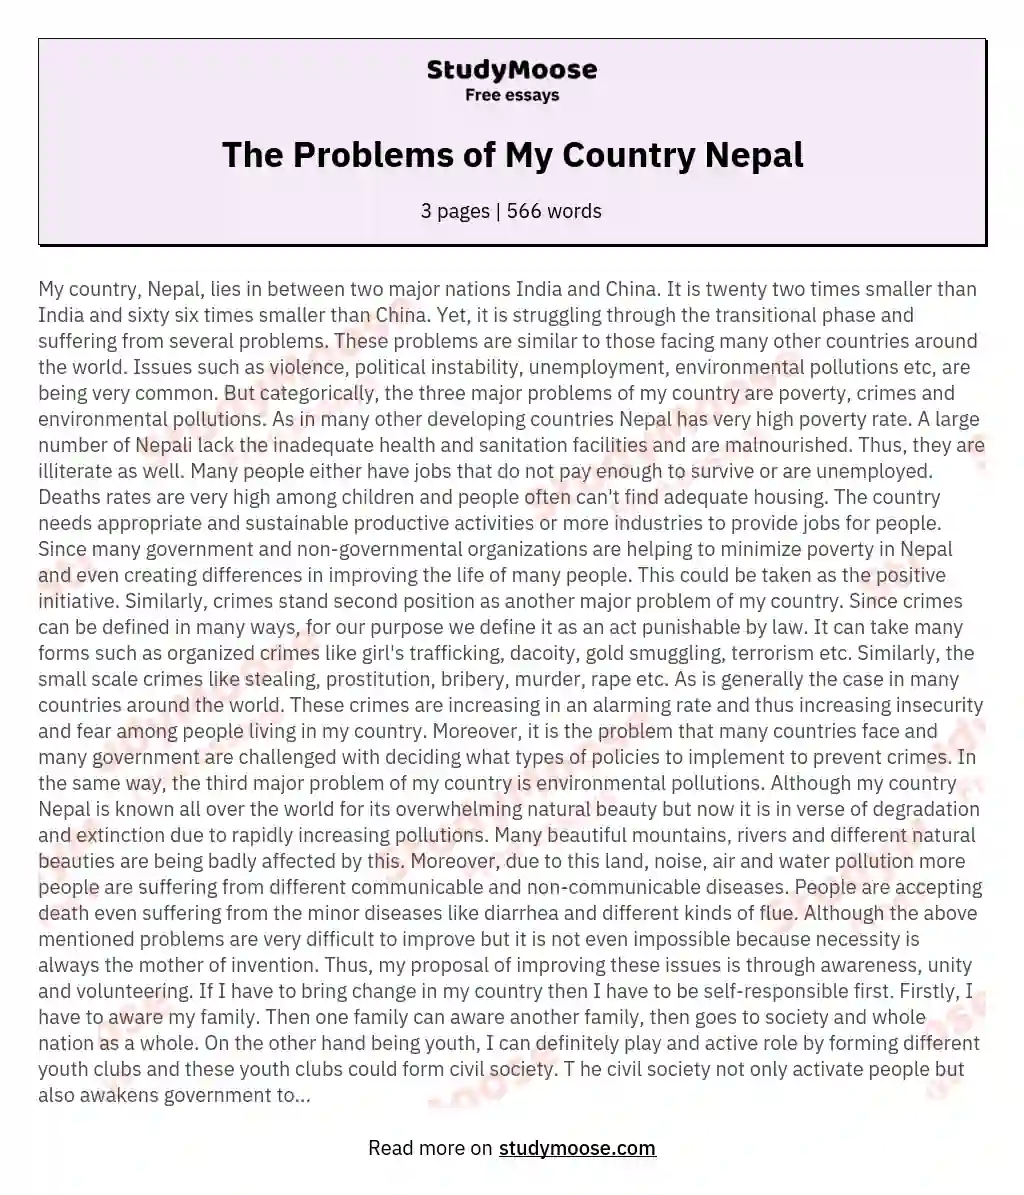 The Problems of My Country Nepal essay